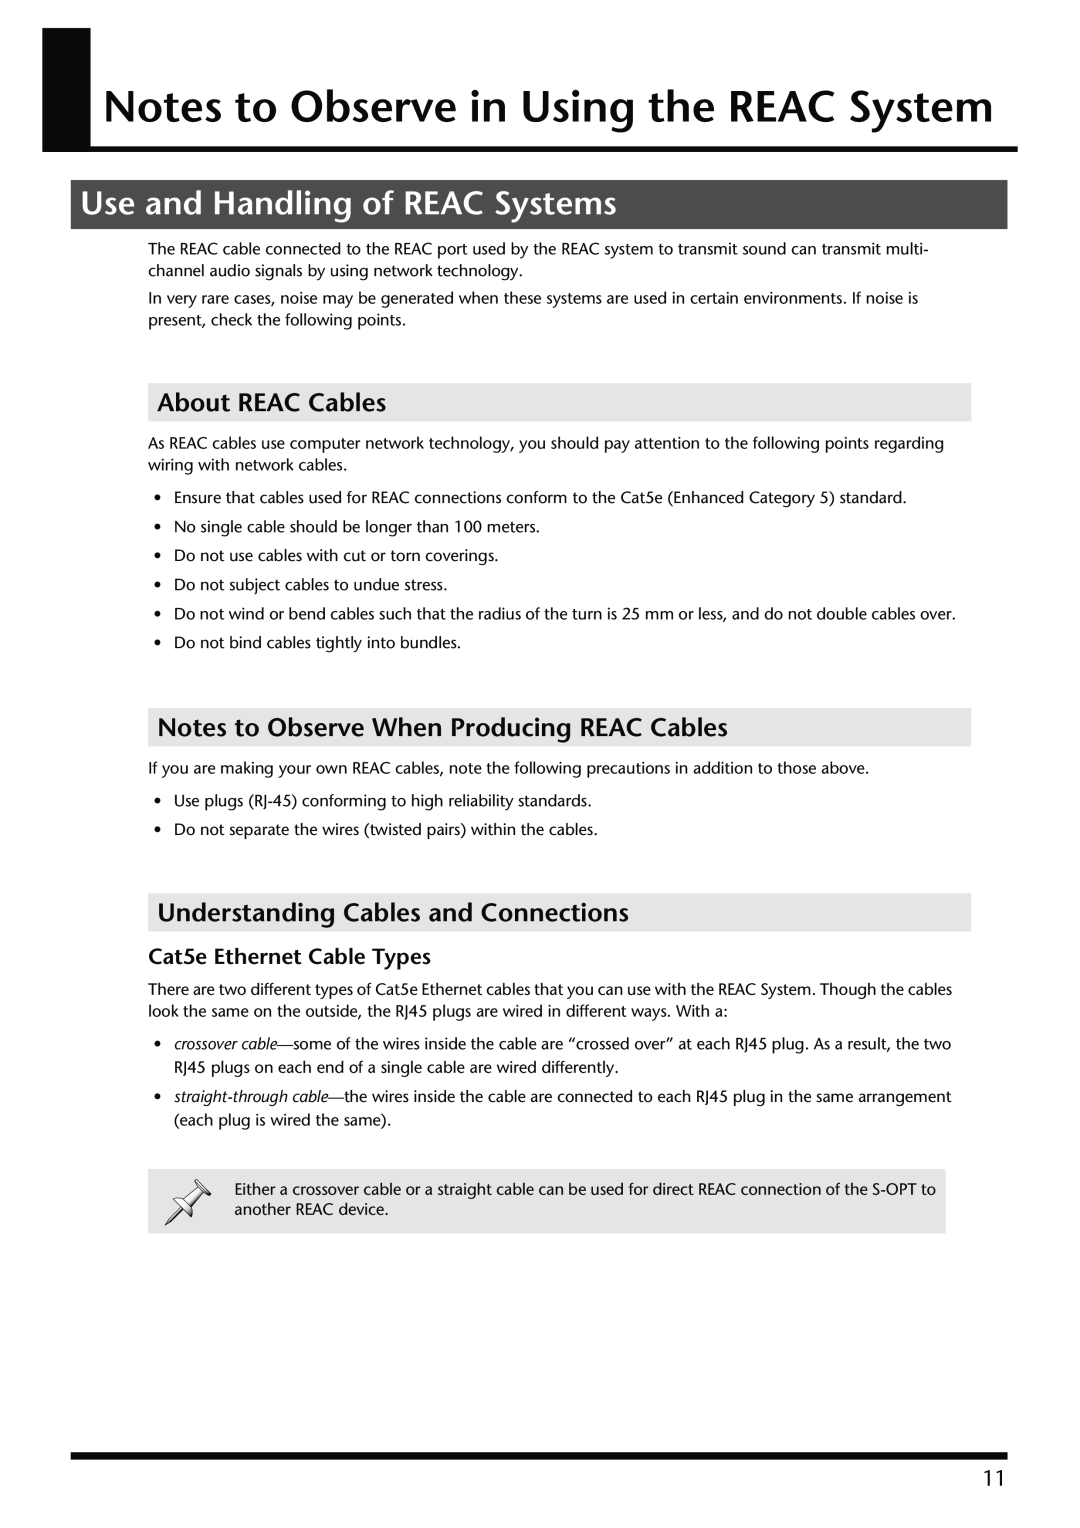 Roland S-OPT owner manual Notes to Observe in Using the REAC System, Use and Handling of REAC Systems, About REAC Cables 